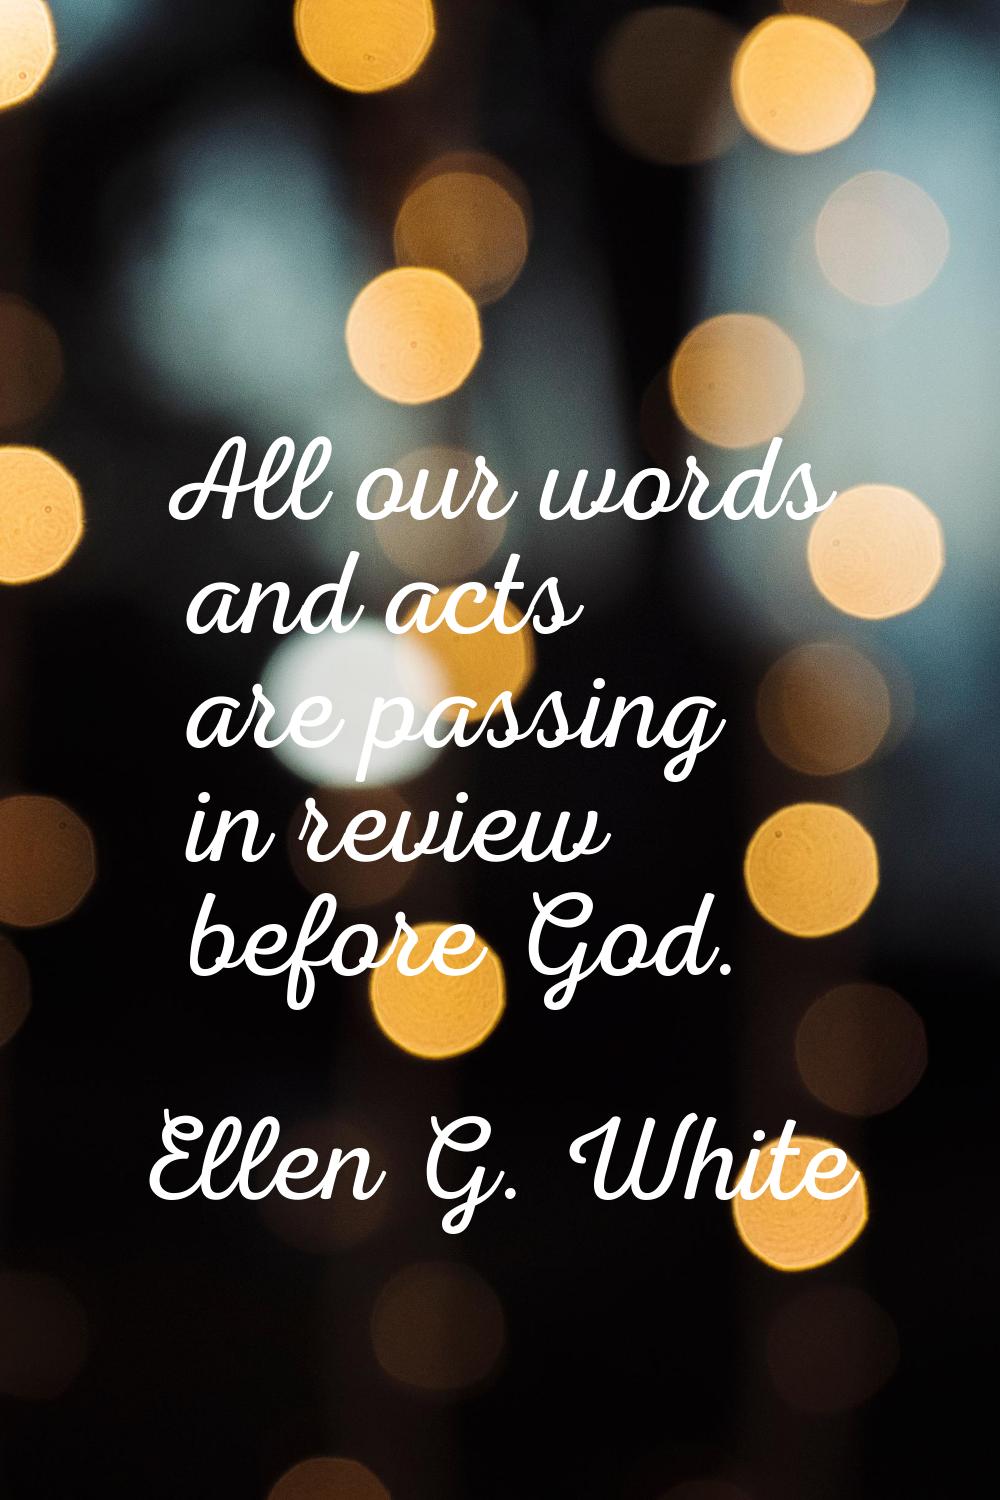 All our words and acts are passing in review before God.